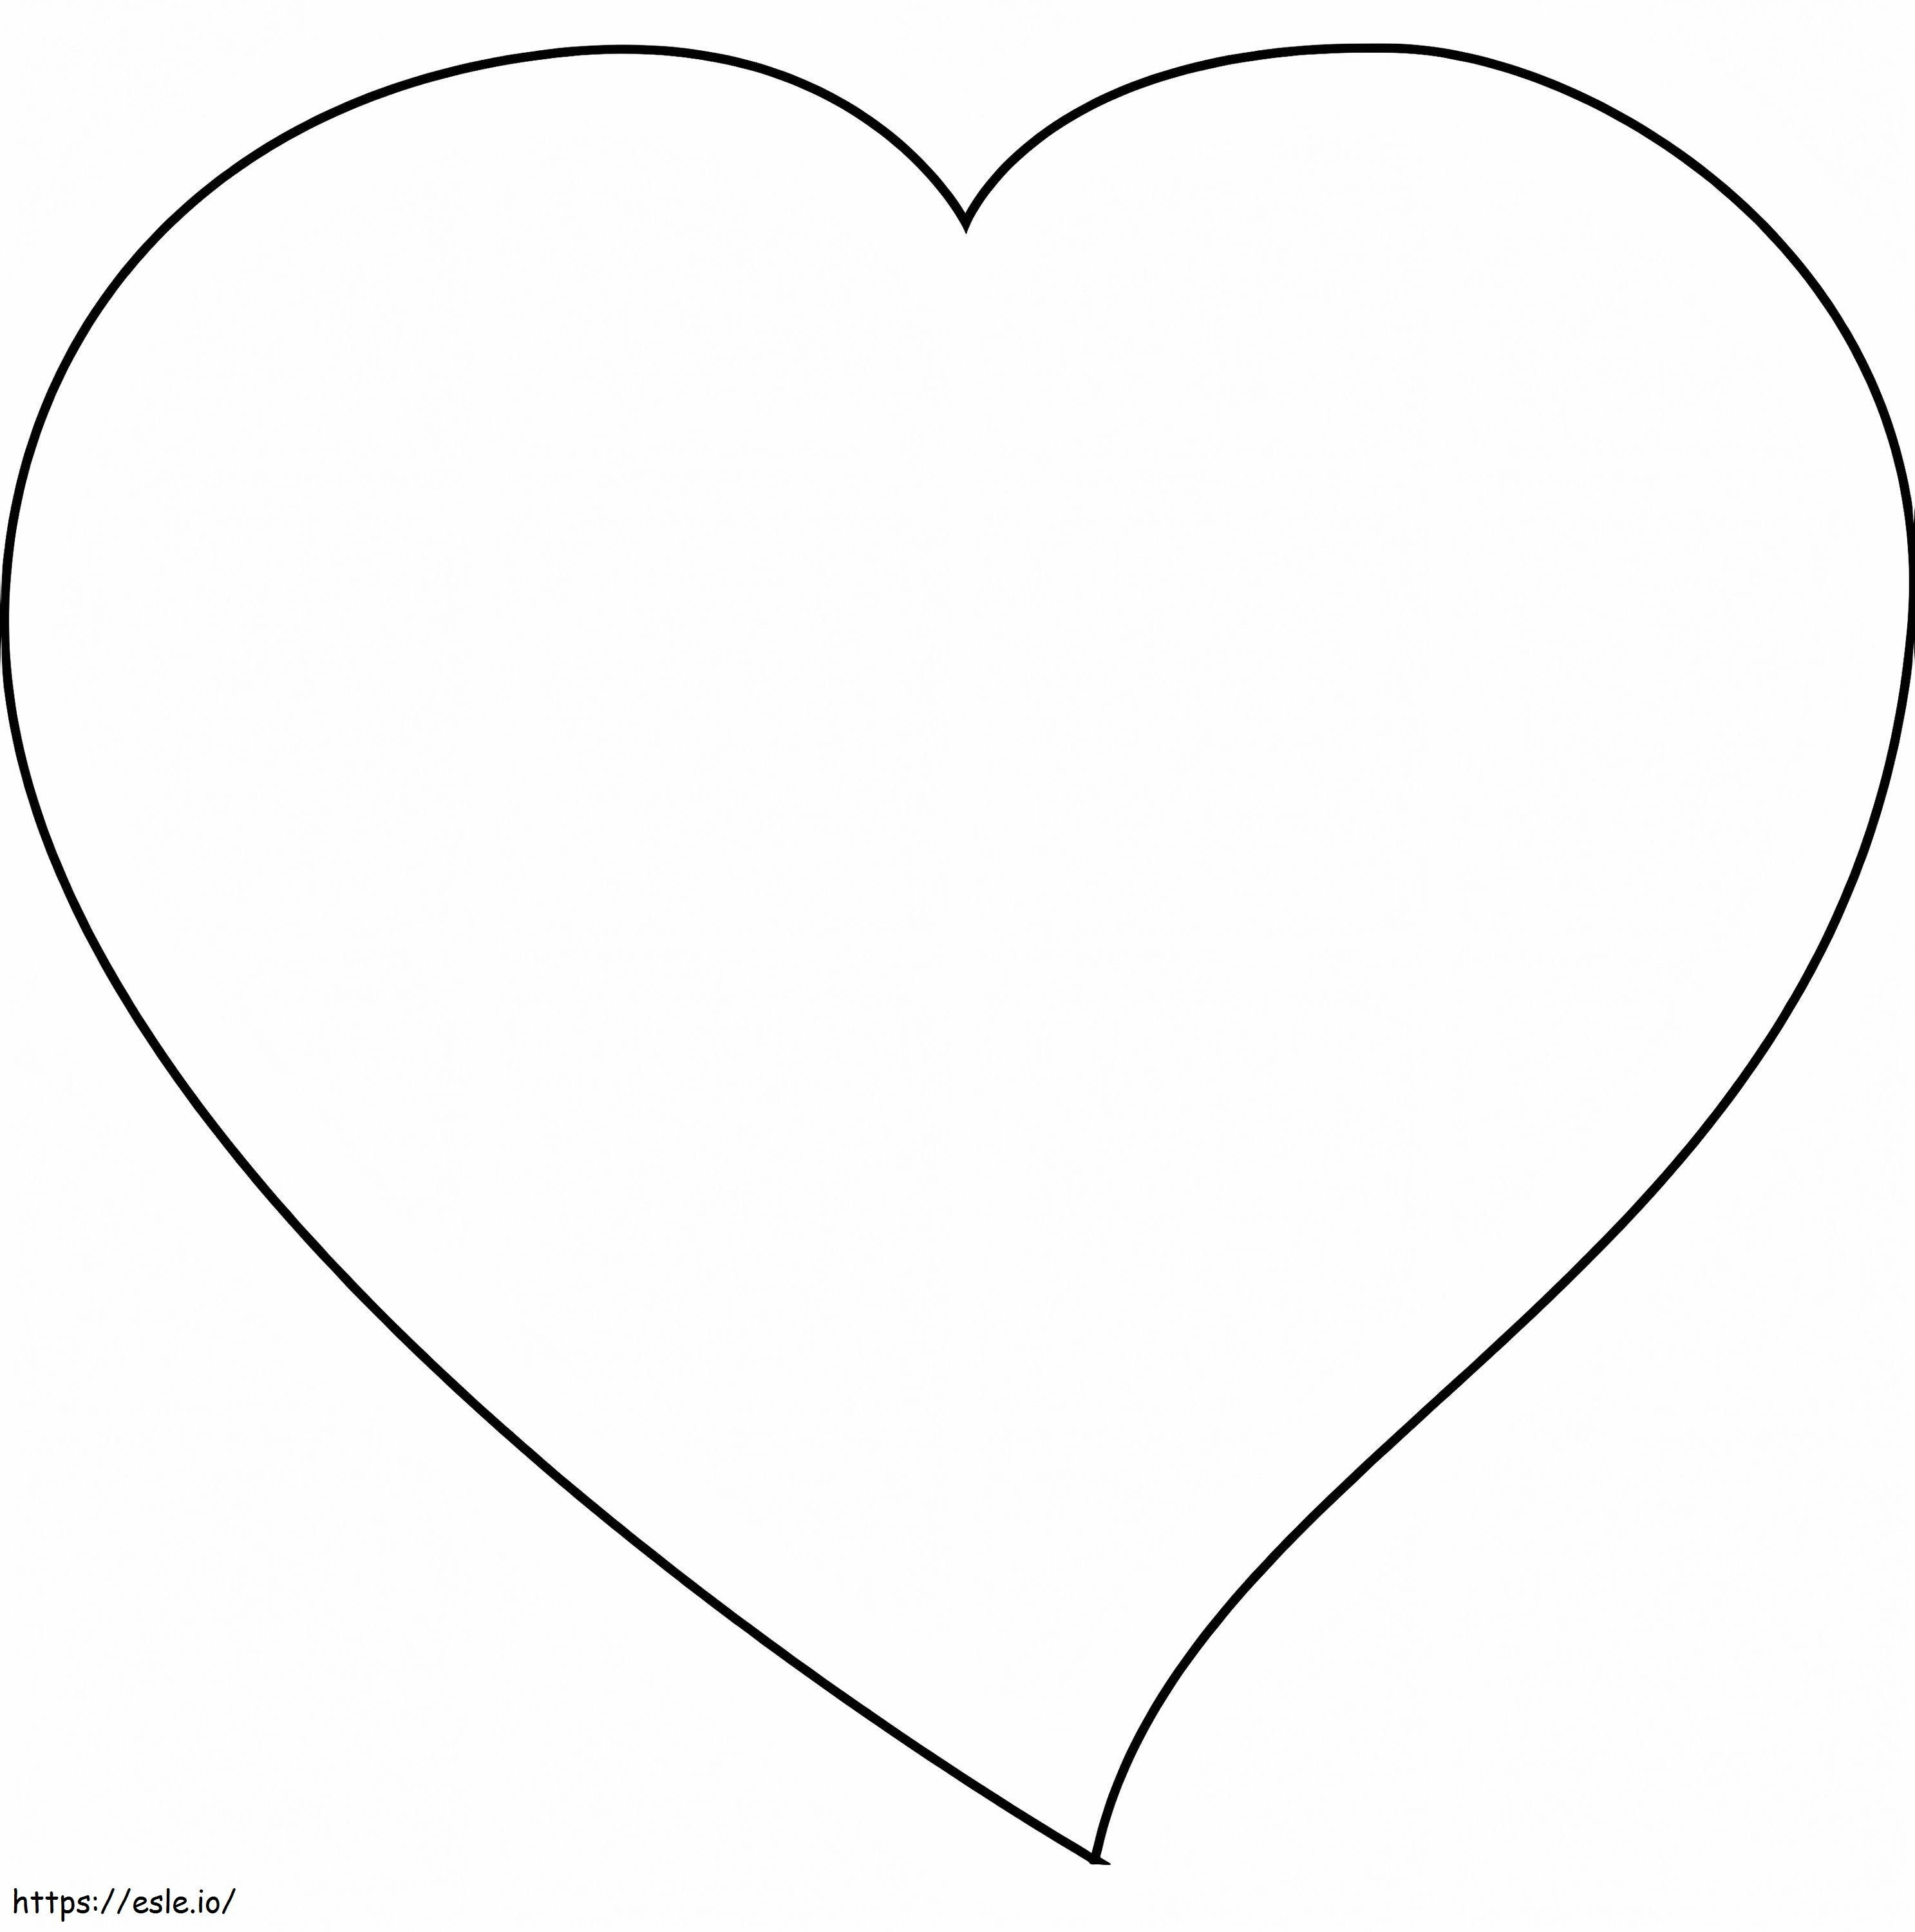 A Simple Heart coloring page